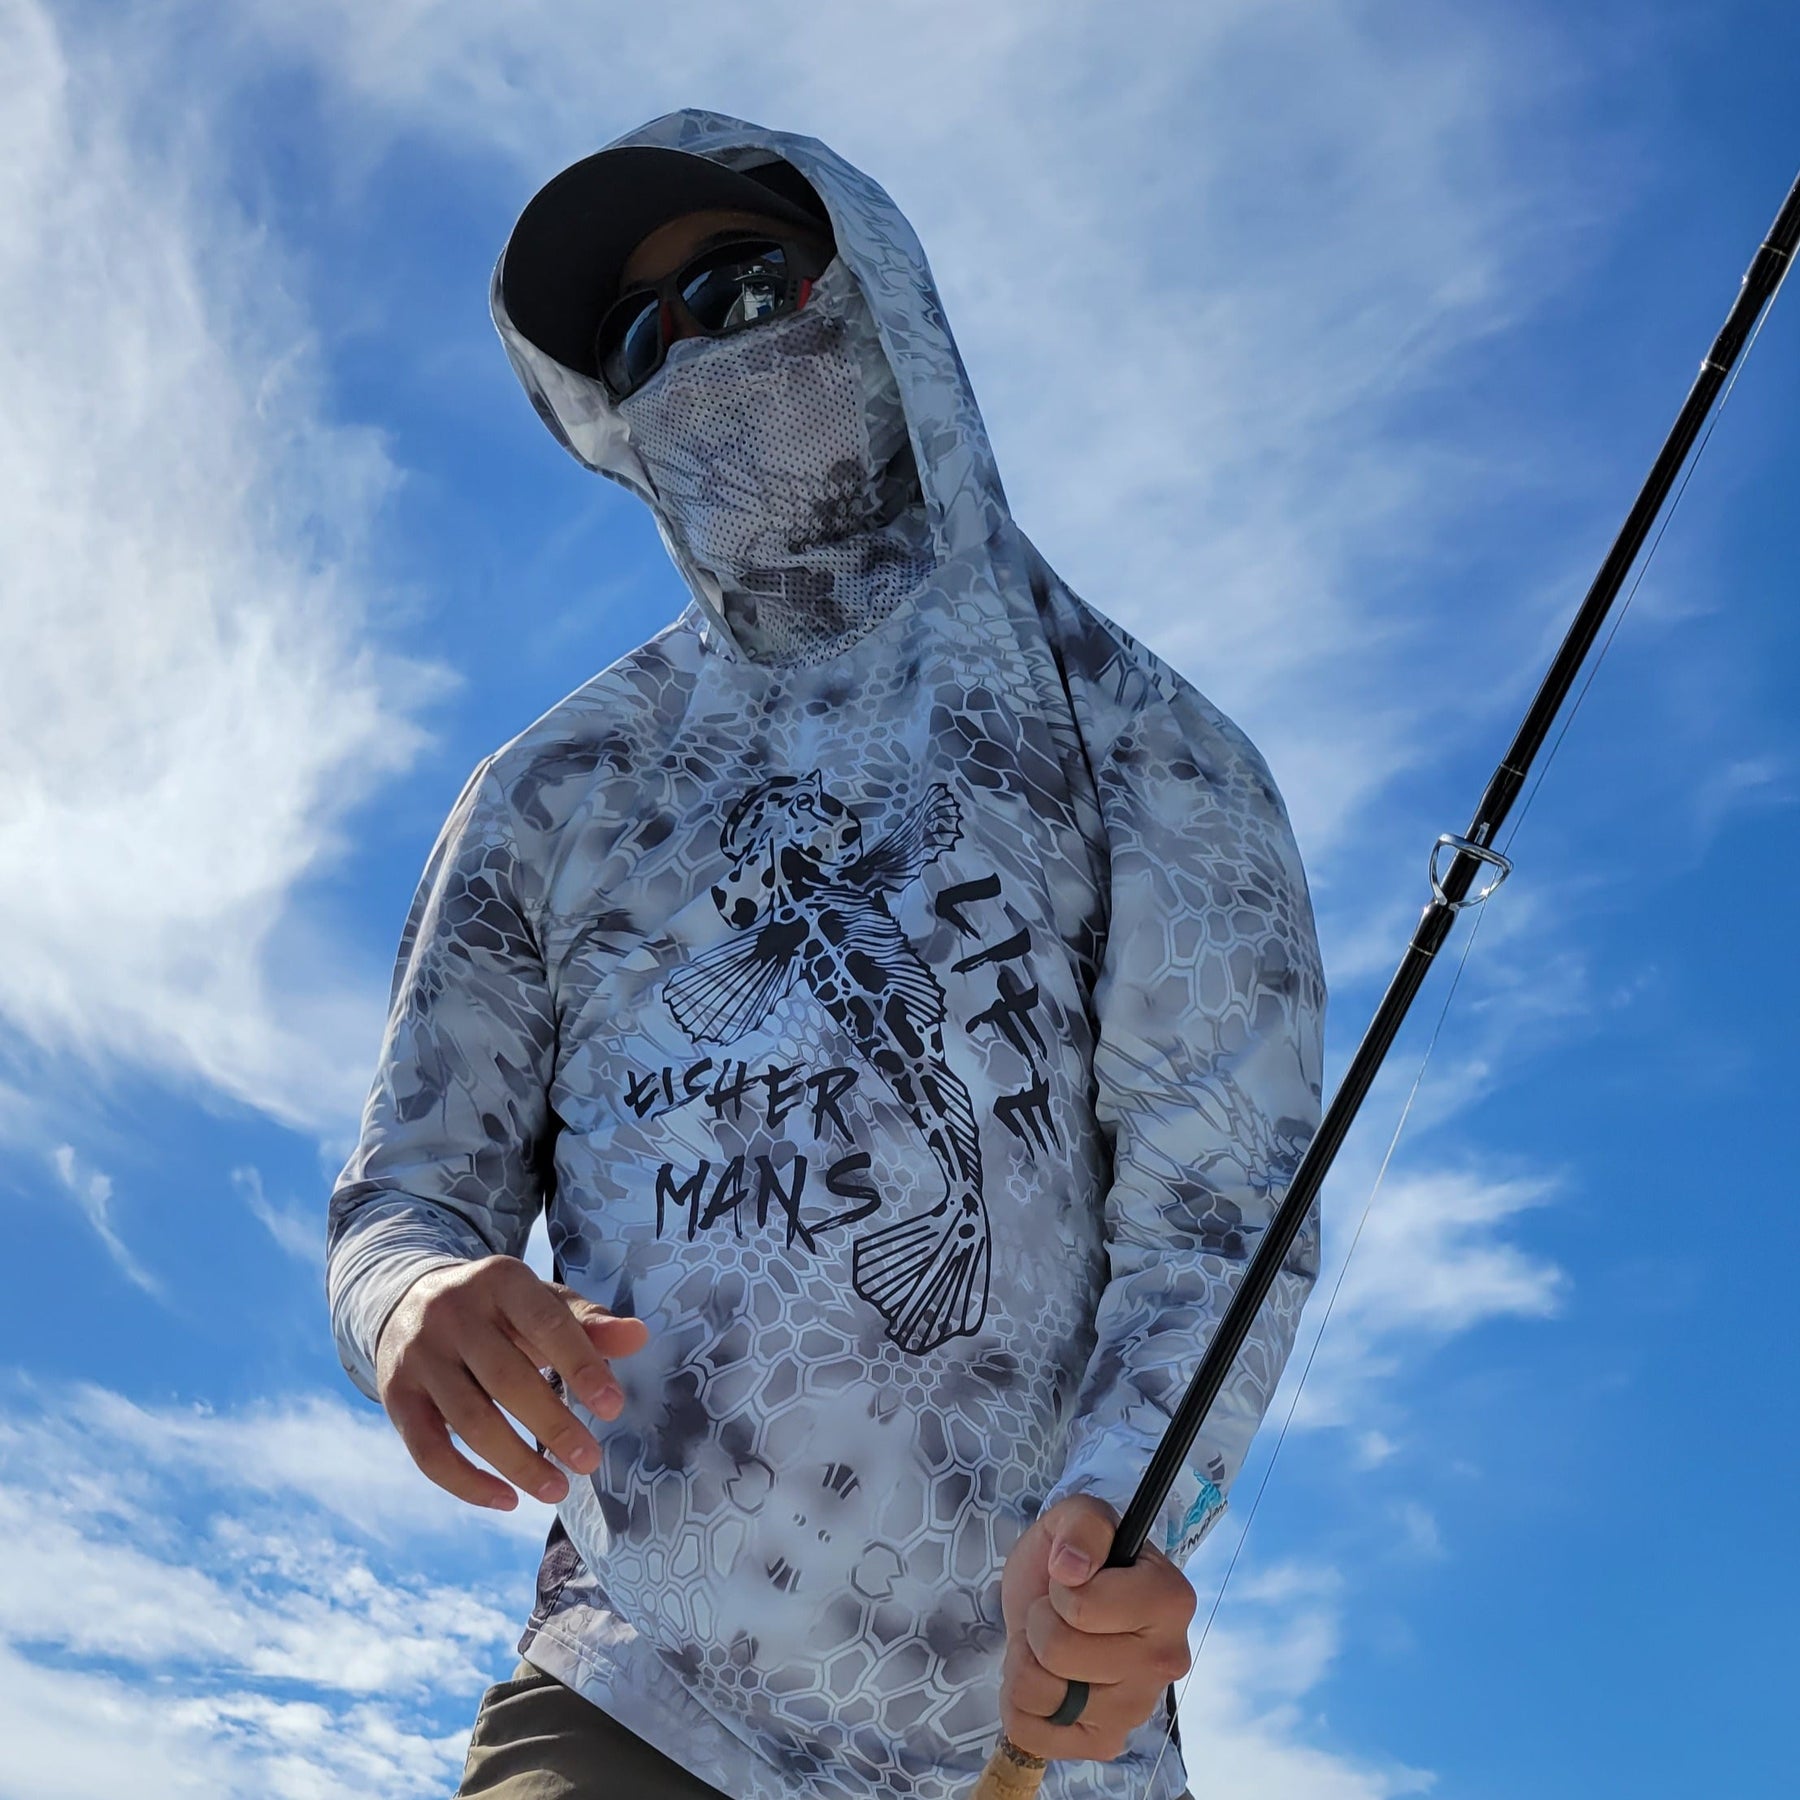 Fishing Life Graphic Design Hooded Pullover – dastardly-designs-studio